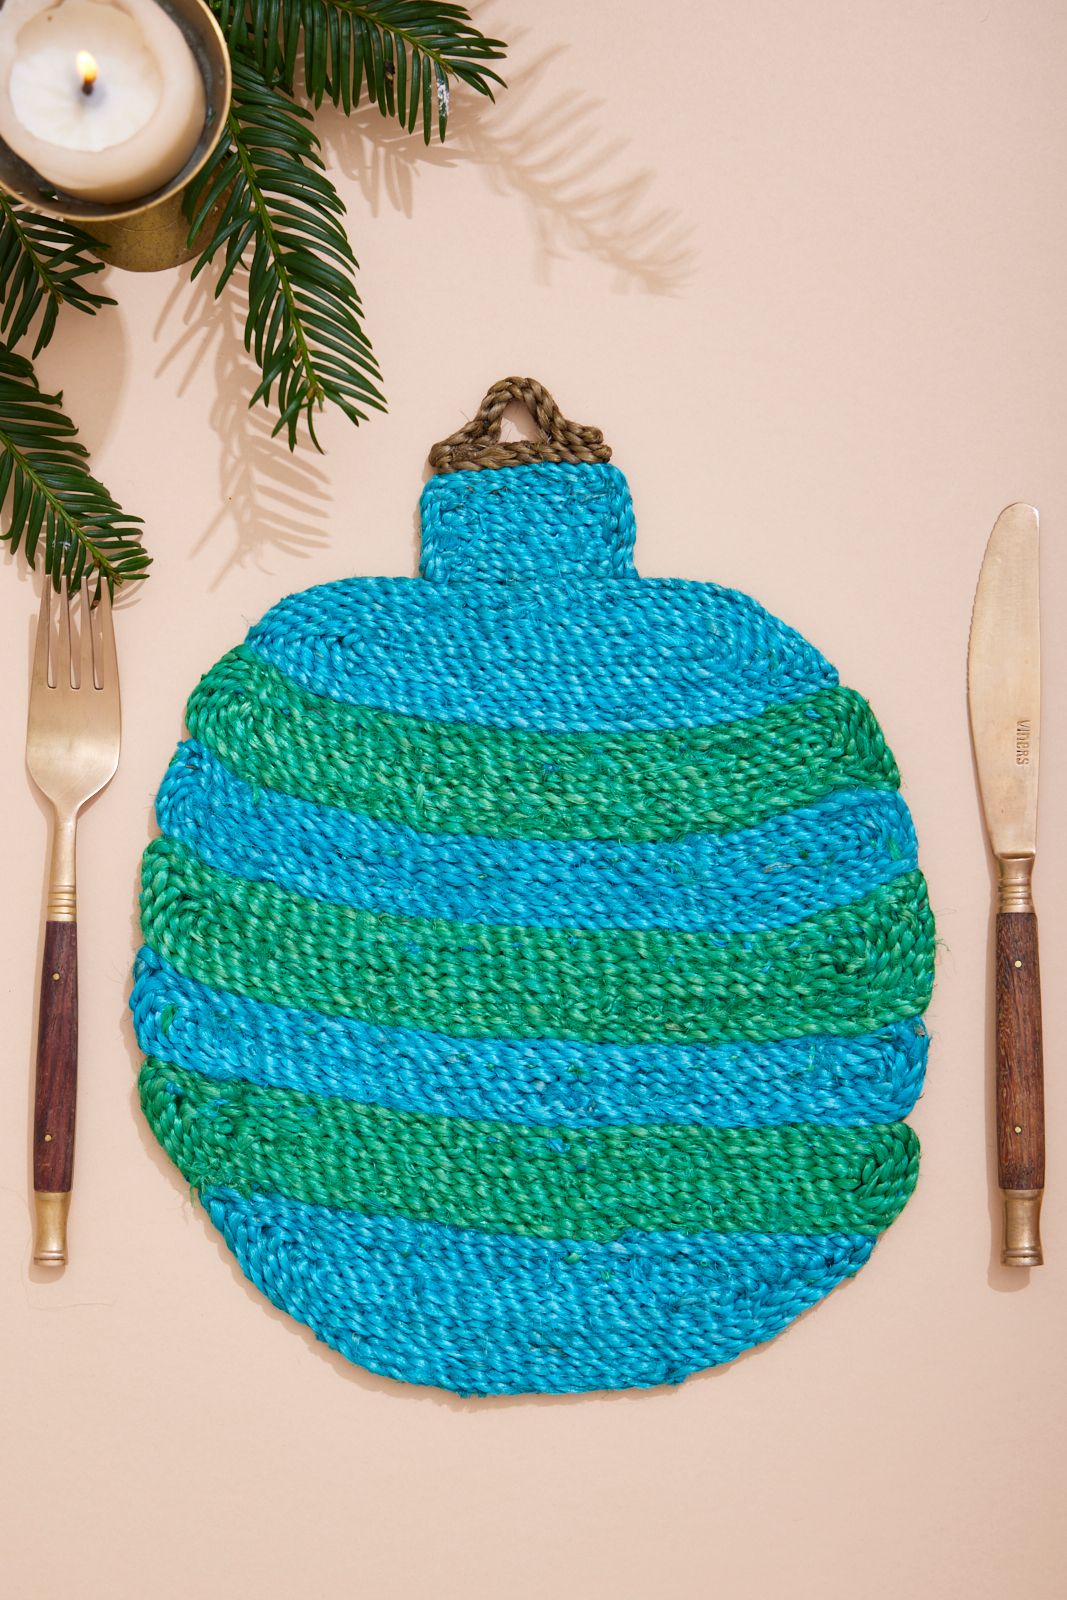 Stripe Bauble Christmas Placemat - Blue and Green